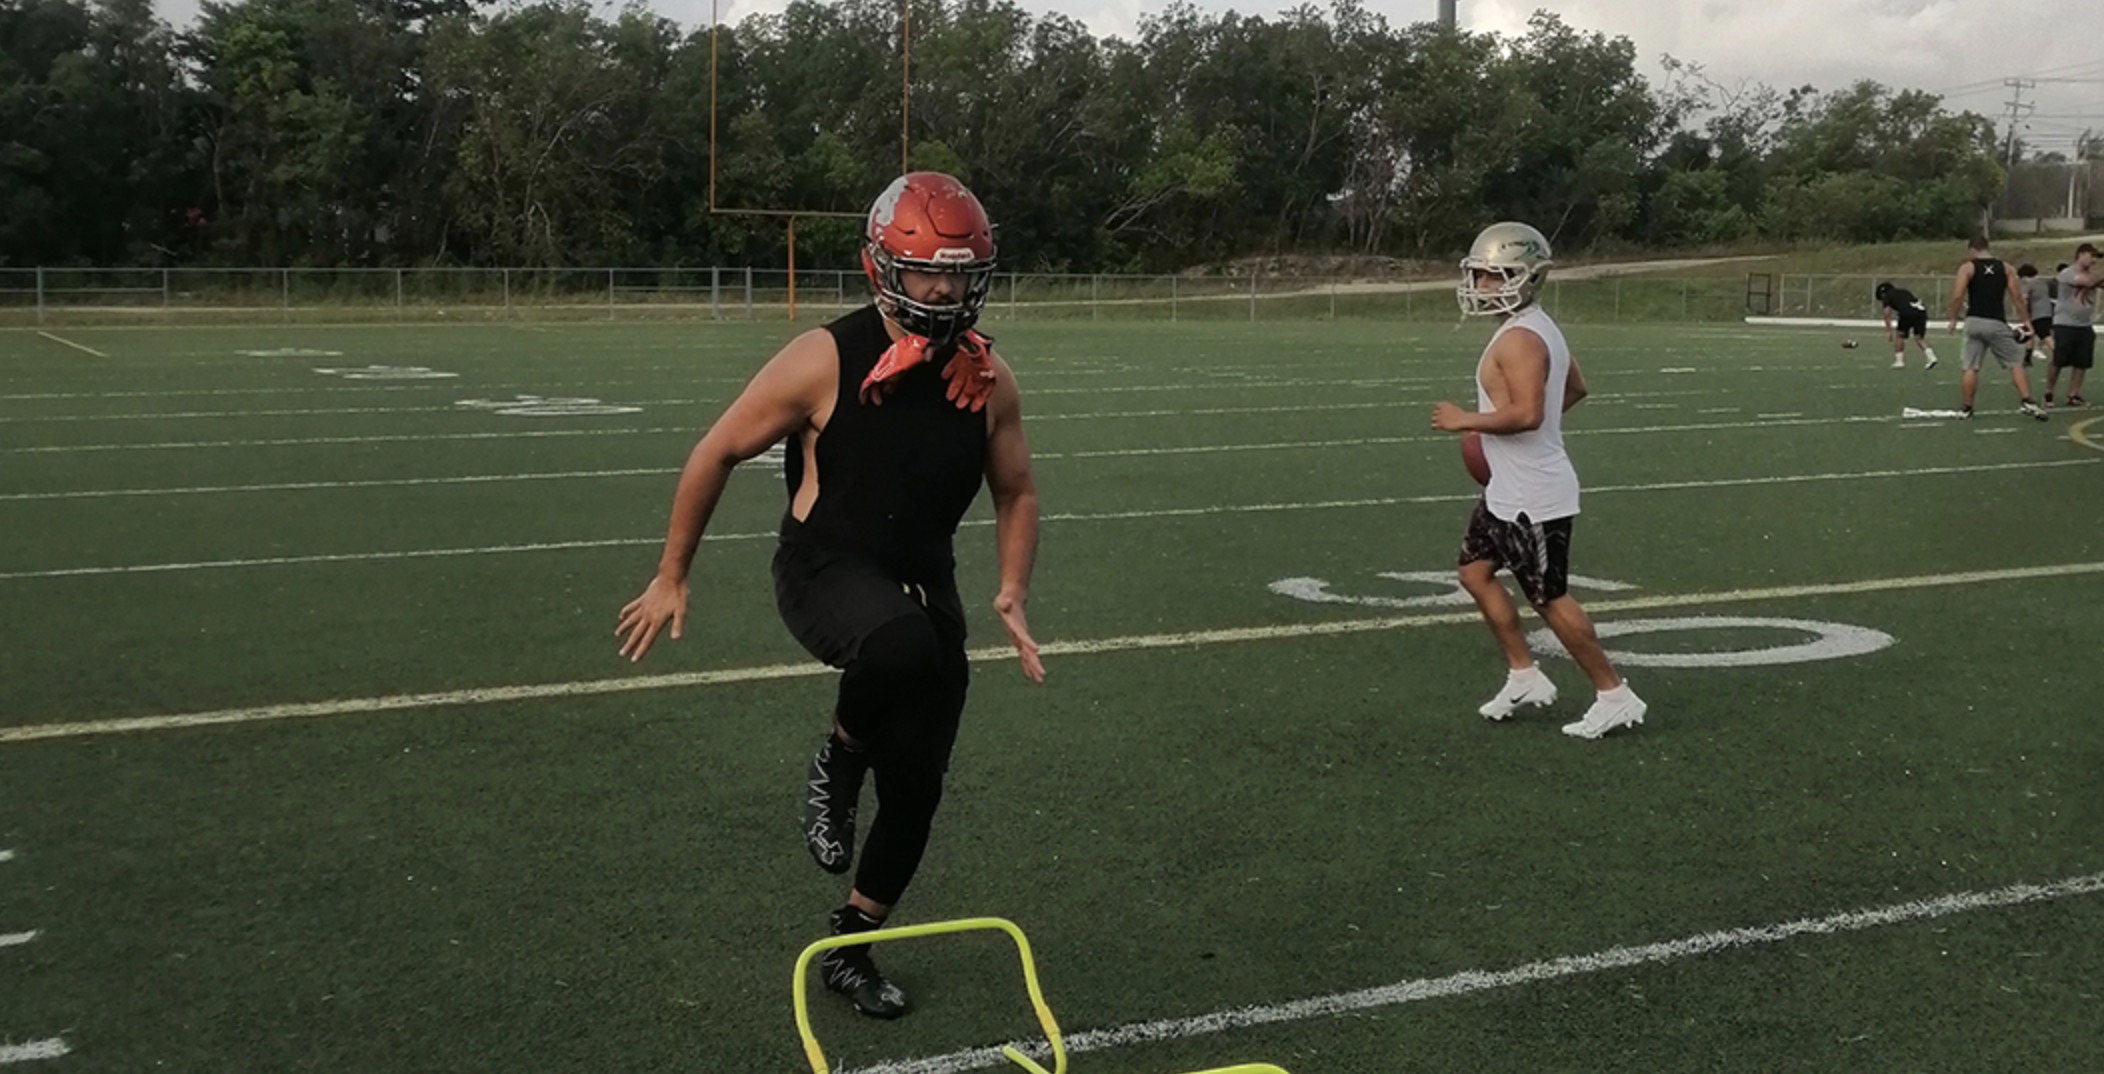 The American Football team Leones Anáhuac Cancún FBA started training for the 2021 season.